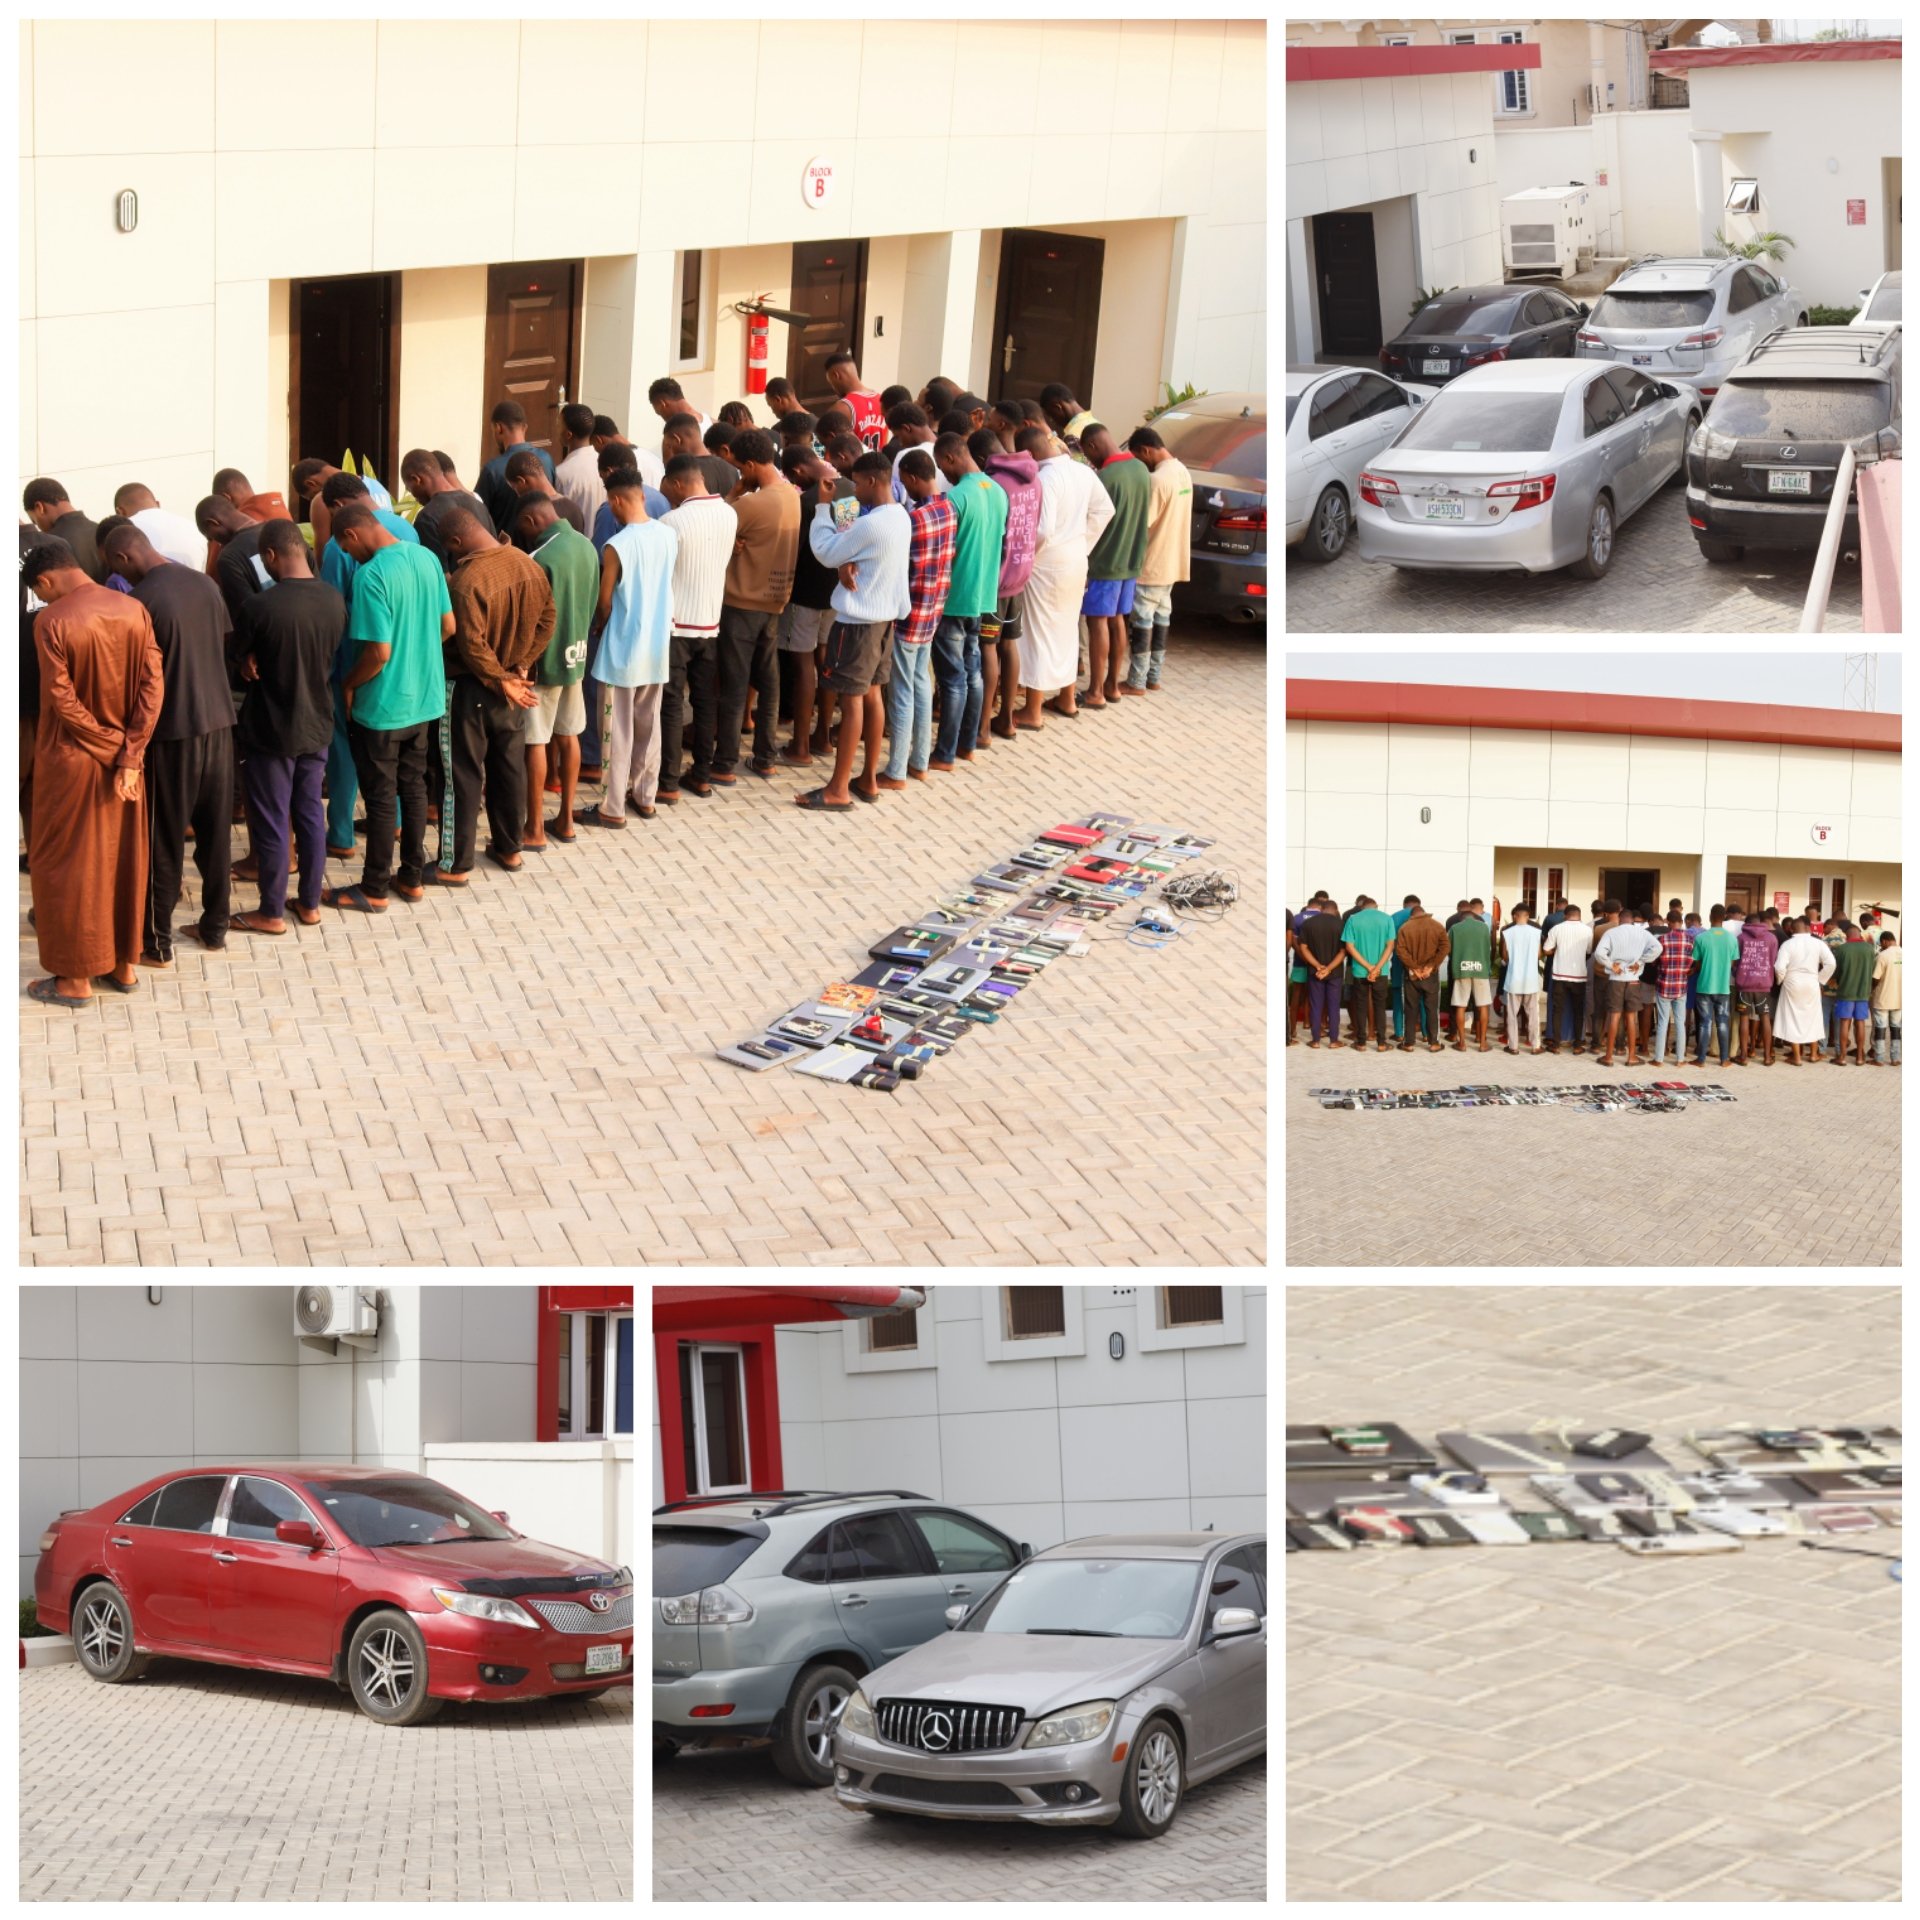 EFCC Arrests 48 University Students, Others For Alleged Cybercrime